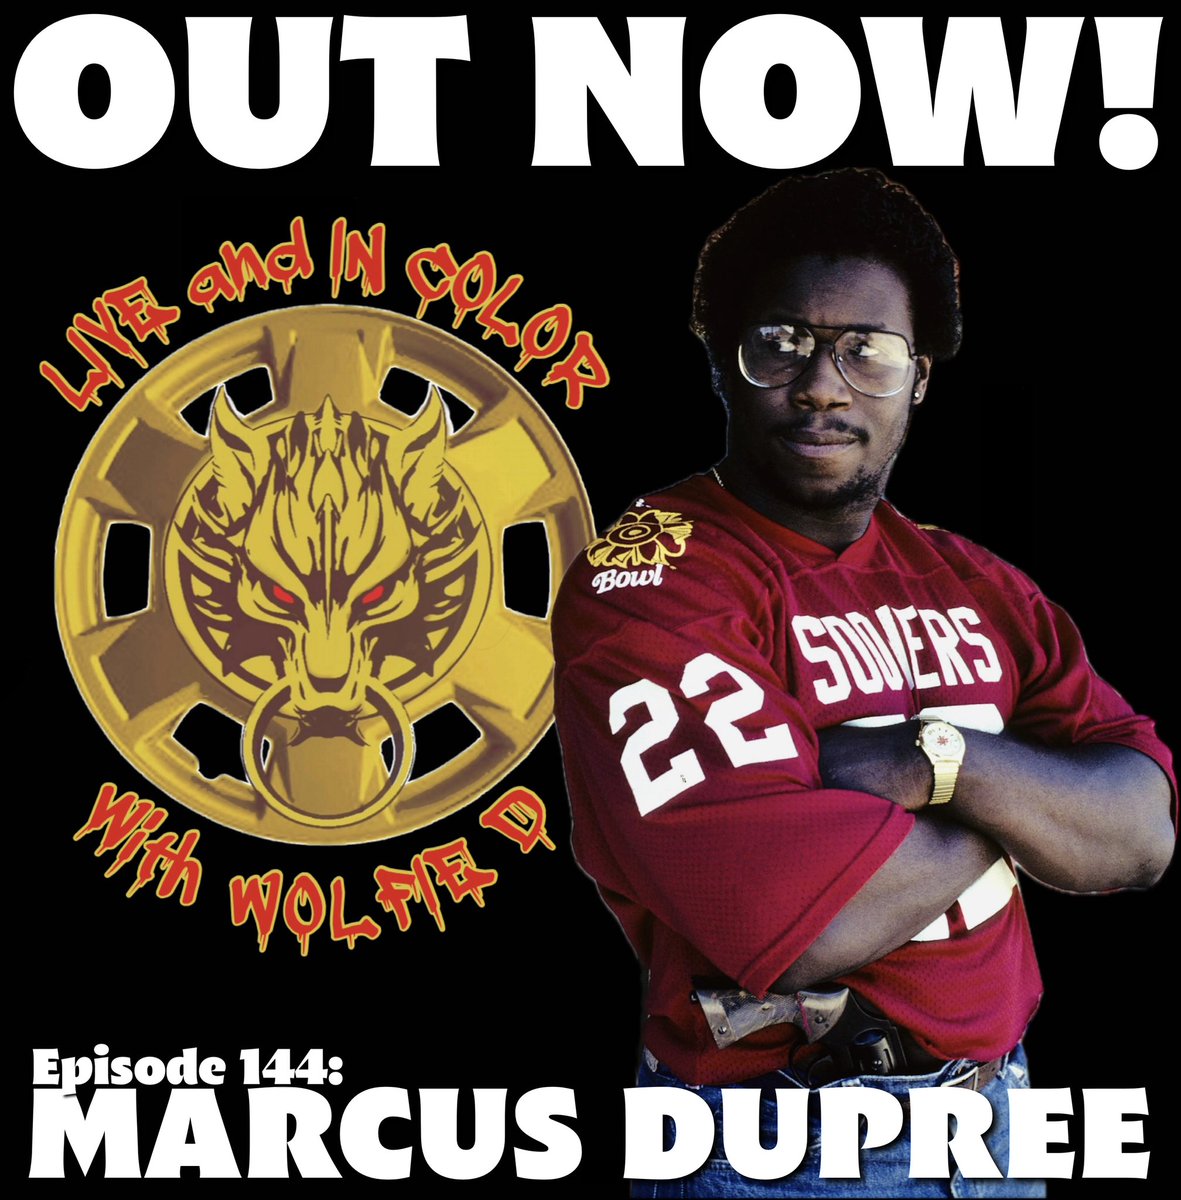 OUT NOW! Marcus Dupree! The most recruited HS football player in the nation, he also wrestled for the USWA! So make sure & check out this conversation we had with the “Best That Never Was!” Enjoy! podcasts.apple.com/us/podcast/liv… youtu.be/6LP3edTHxLI?si… open.spotify.com/episode/3D3mZN…